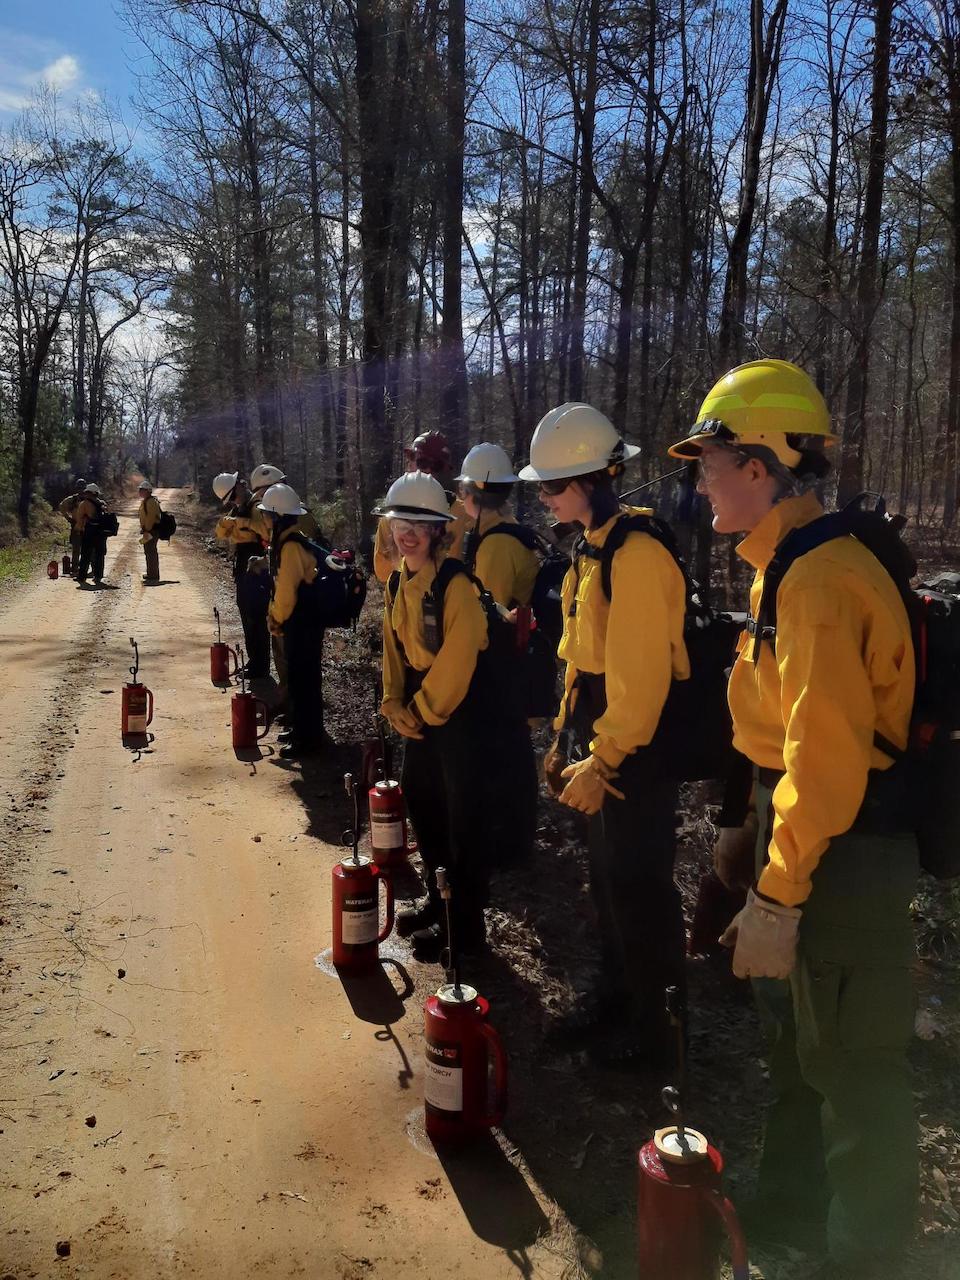 Members of the all-female wildland fire crew were briefed by Megan Saylors, the crew superintendent with the Forest Service, before conducting a prescribed fire. The crew will work and travel throughout the Southern Region, gaining hands-on experience in fire and fuels management work. (USDA Forest Service photo by Megan Saylors)